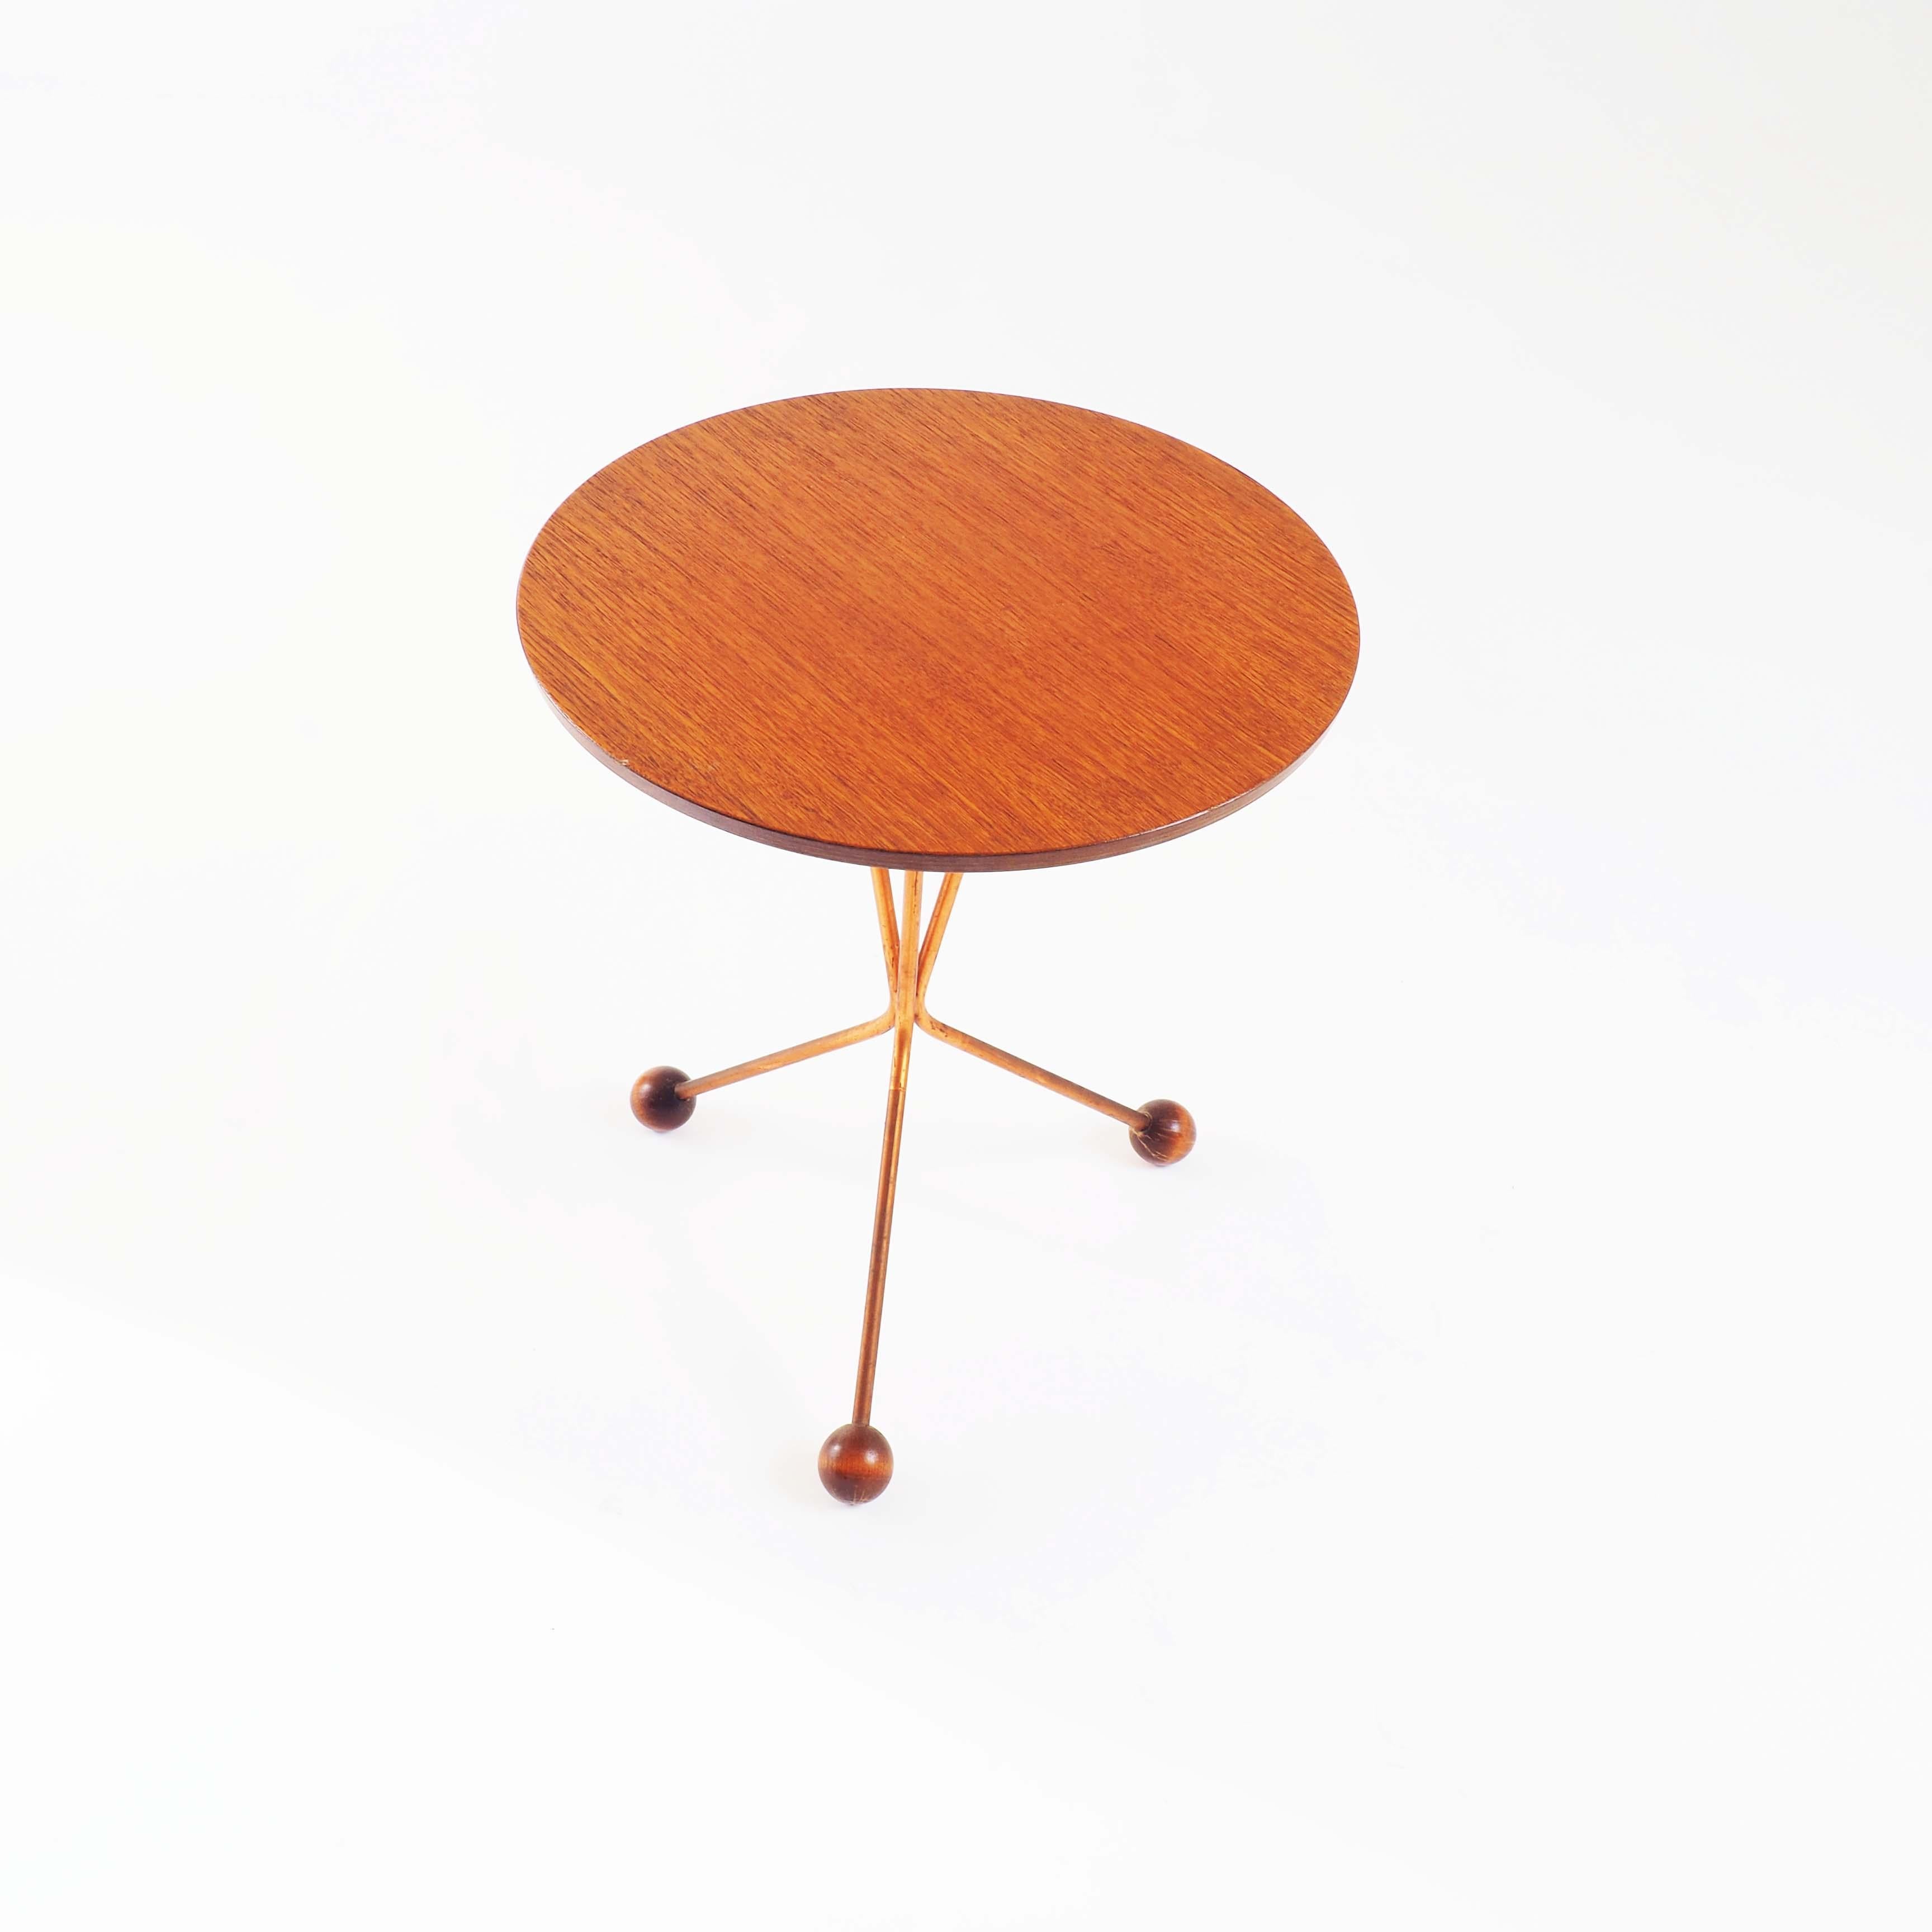 Side table by Alberts, Sweden. Designed by Albert Larsson.
With tabletop in teak and atomic wood-tipped legs in copper.